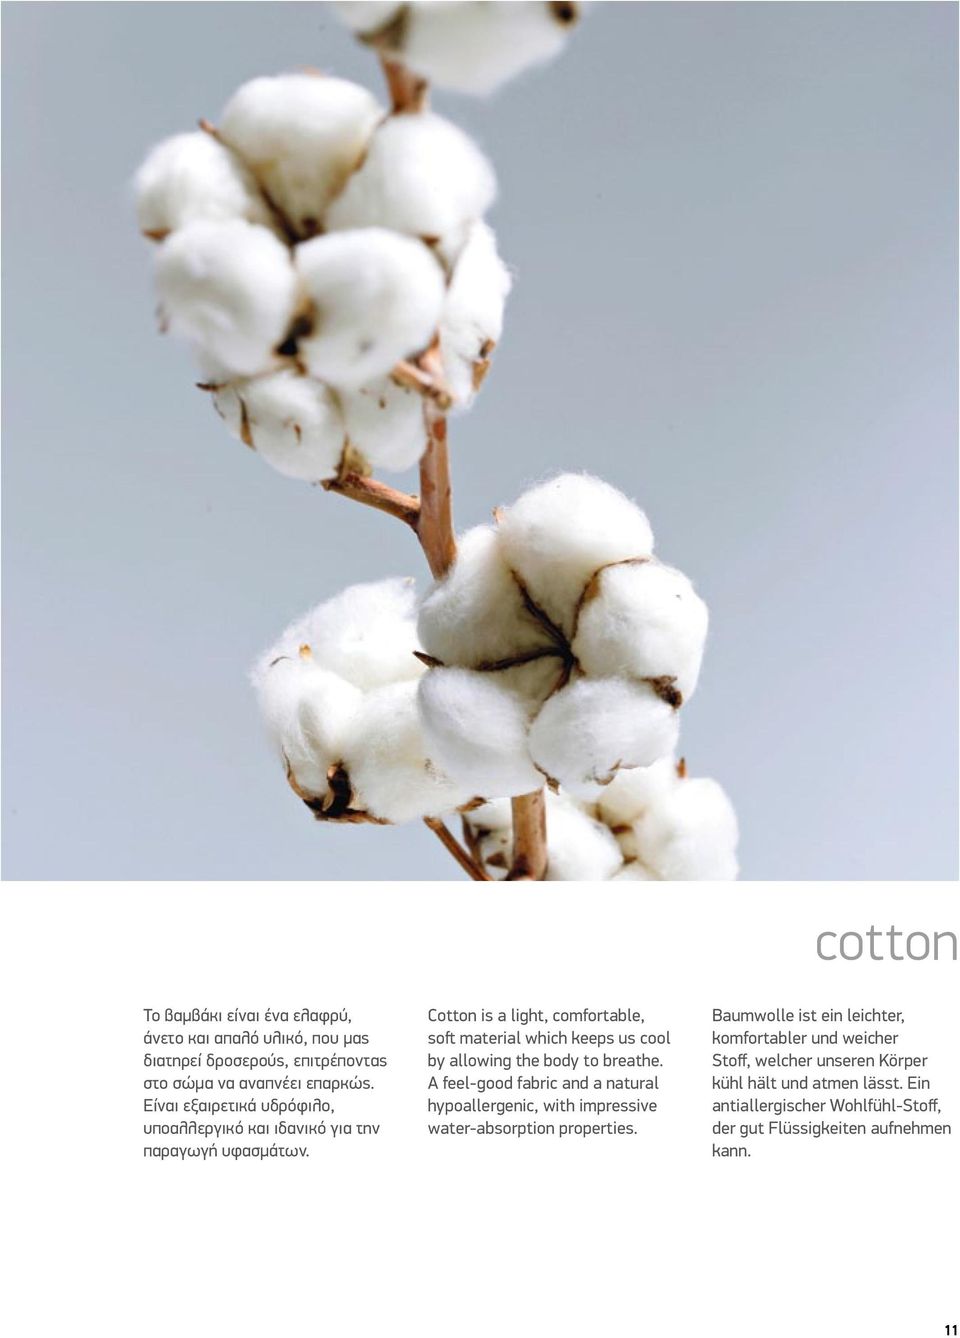 Cotton is a light, comfortable, soft material which keeps us cool by allowing the body to breathe.